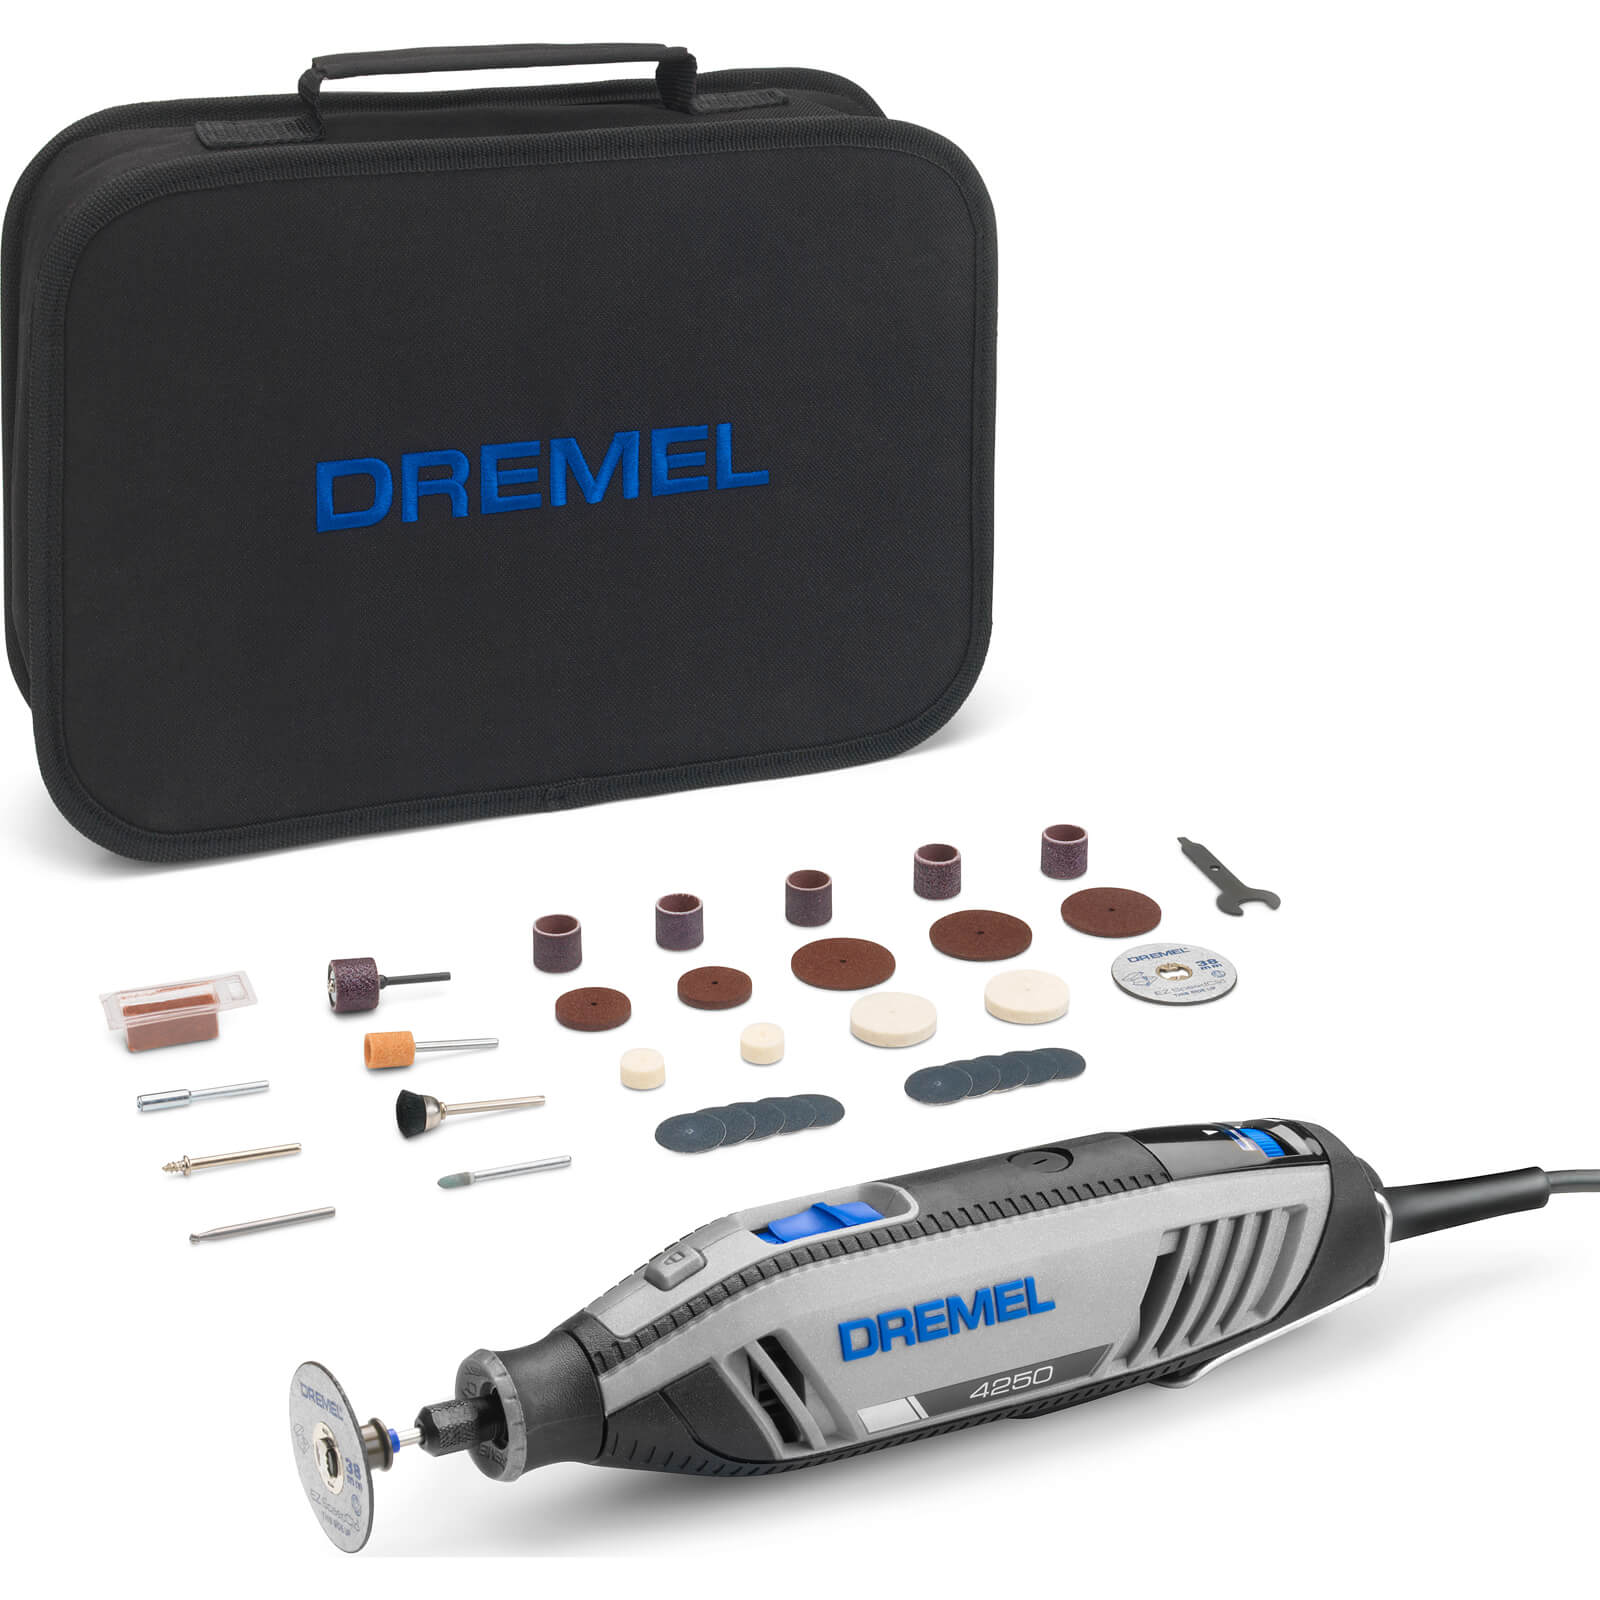 Image of Dremel 4250 Rotary Multi Tool and 35 Accessories